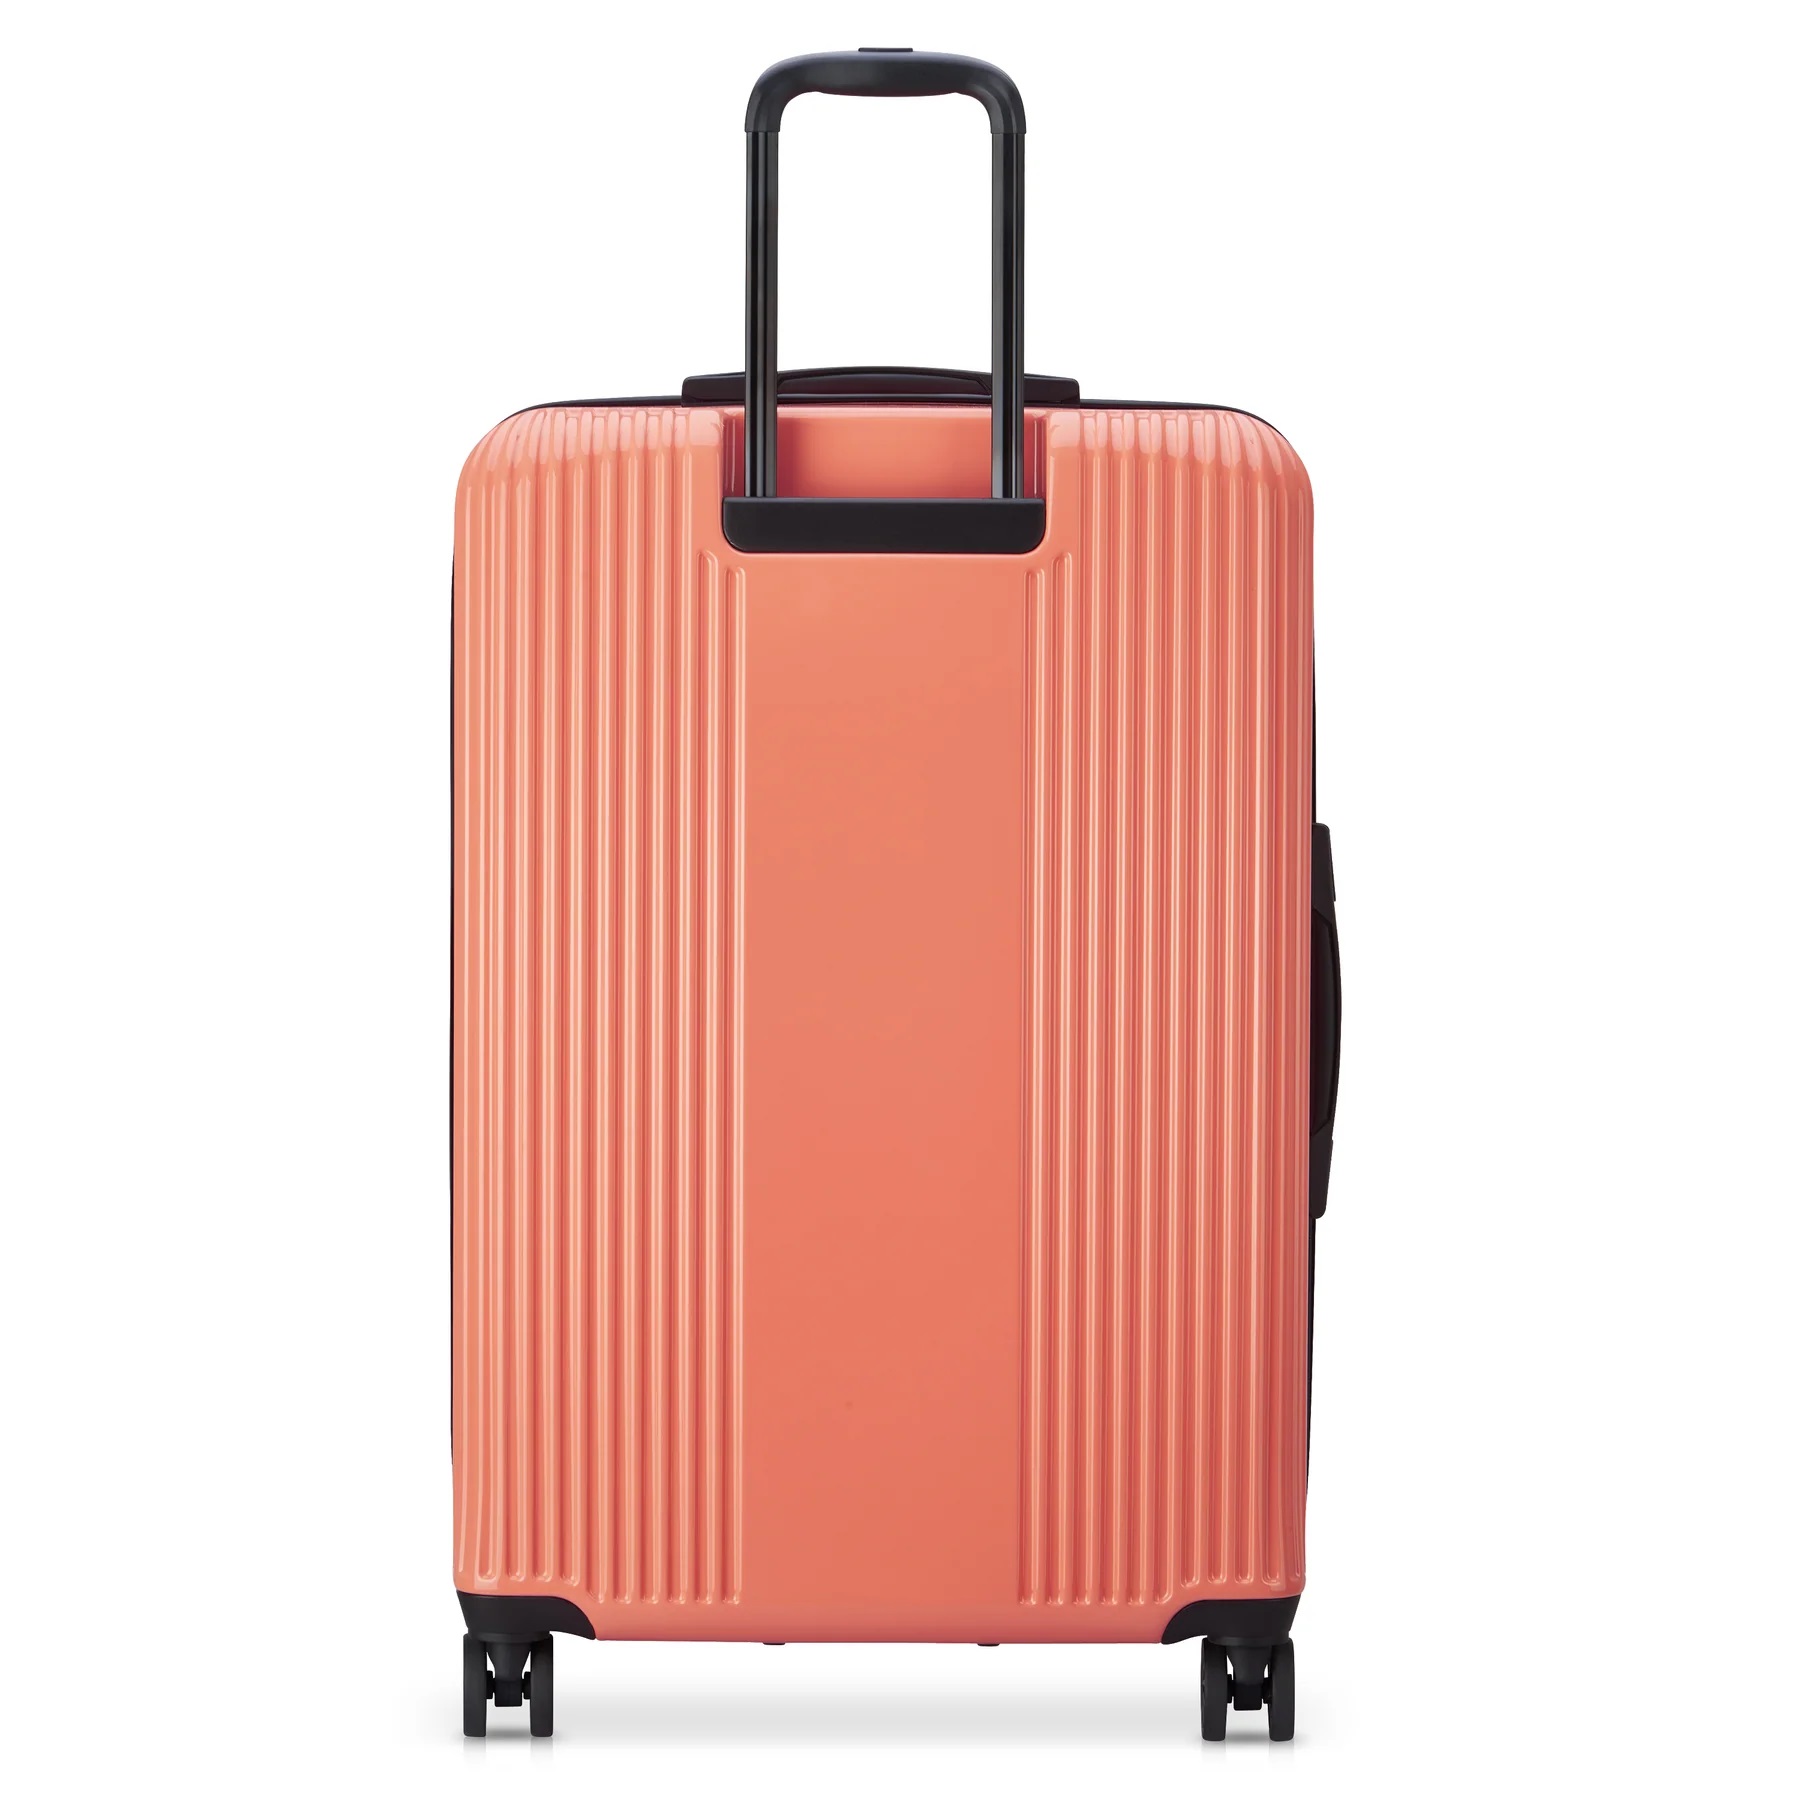 VALI DELSEY PARIS LARGE TRUNK OPHELIE 4 DOUBLE WHEEL EXPANDABLE TROLLEY CORAL PINK SUITCASE 1